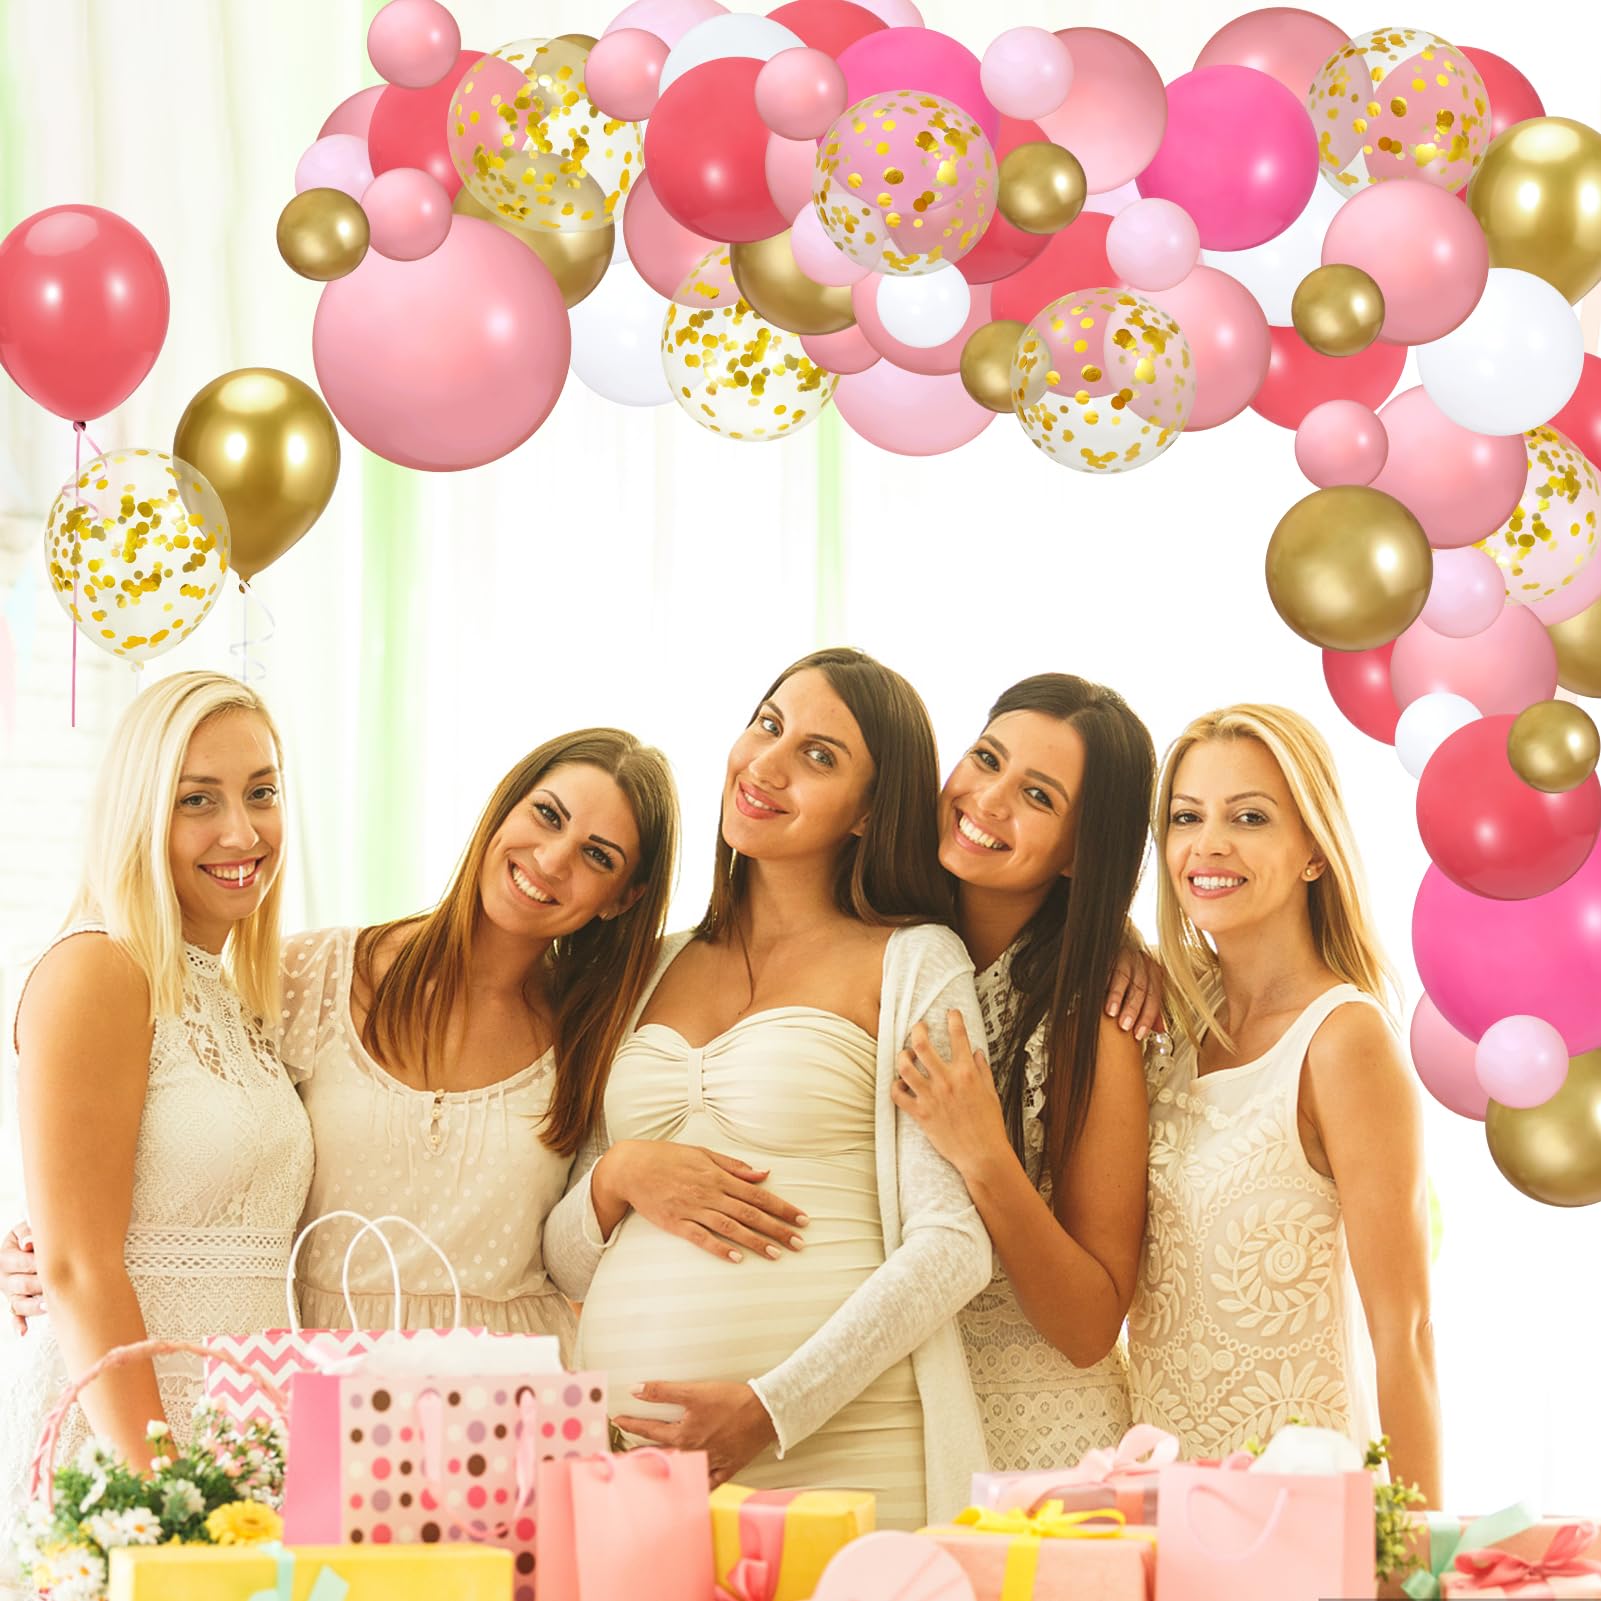 KaKaPops 169pcs Pink Balloon Garland Arch Kit, Gold White and Pink Balloons with Different Size Hot Pink Light Pink Balloons for Birthday Party Girl Baby Shower Decorations